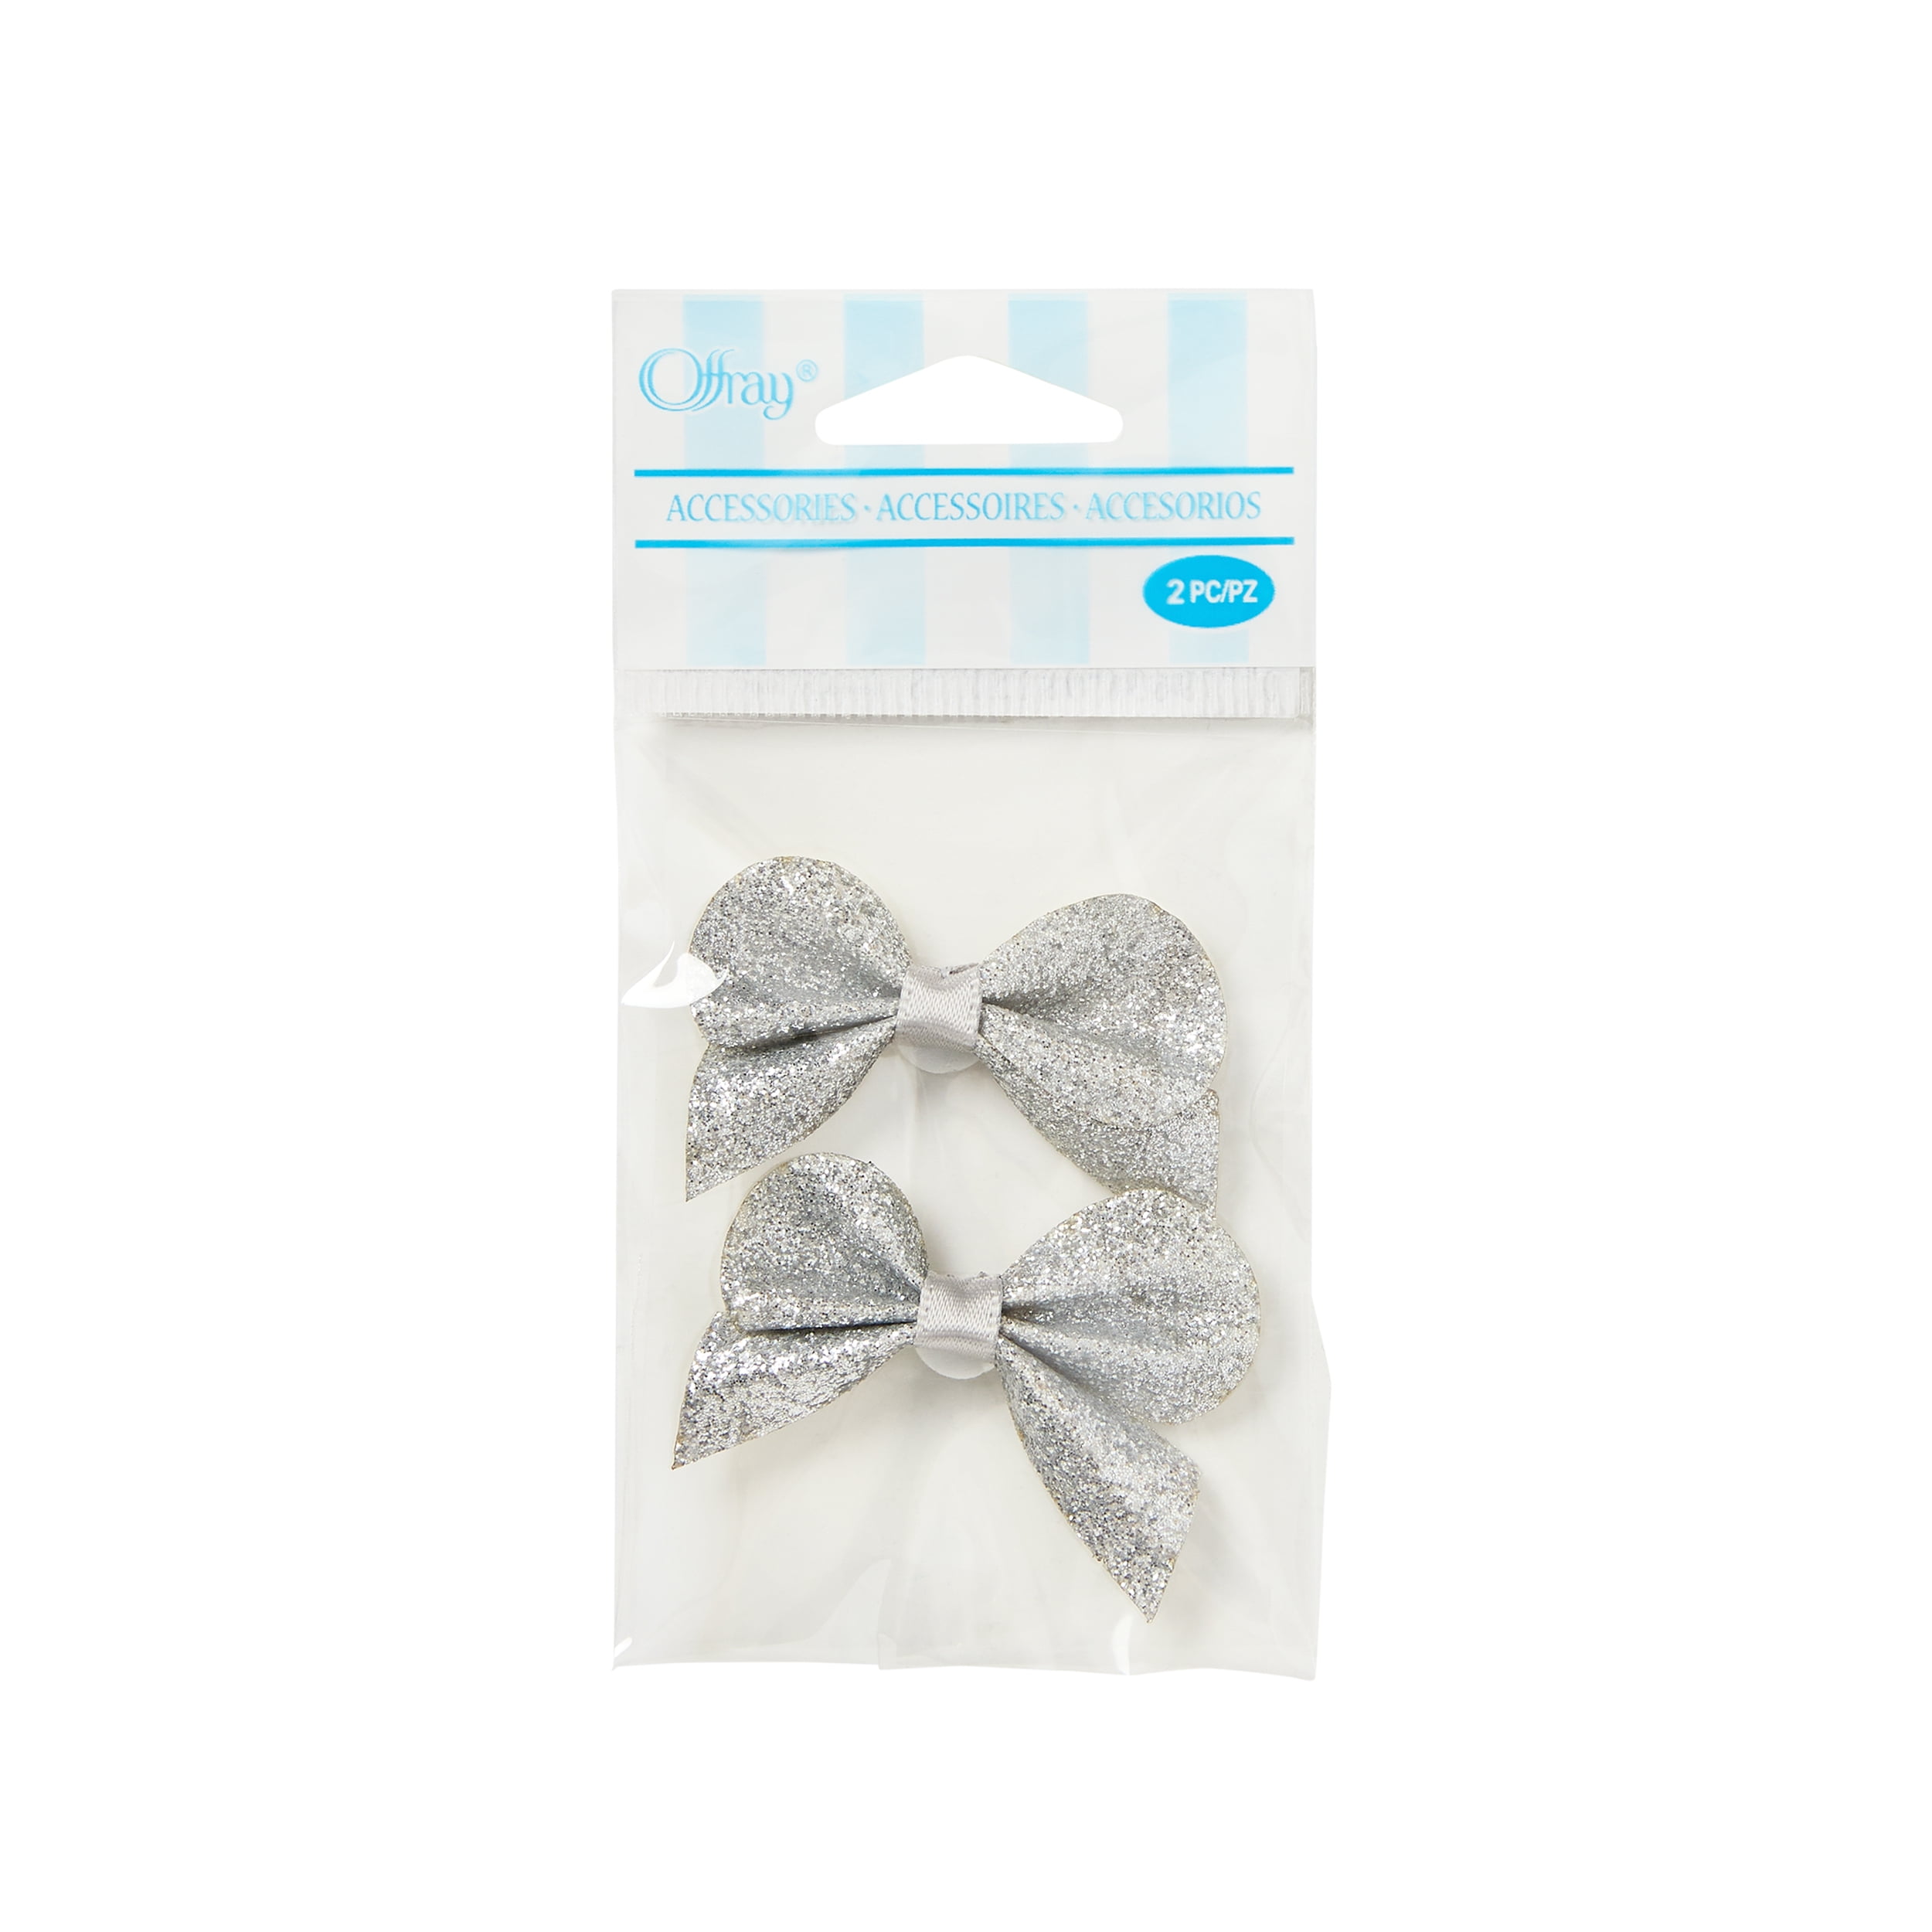 Offray Accessories, Silver Glitter Bows Accessory for Wedding, Hair Clips, and Scrapbooking, 2 count, 1 Package